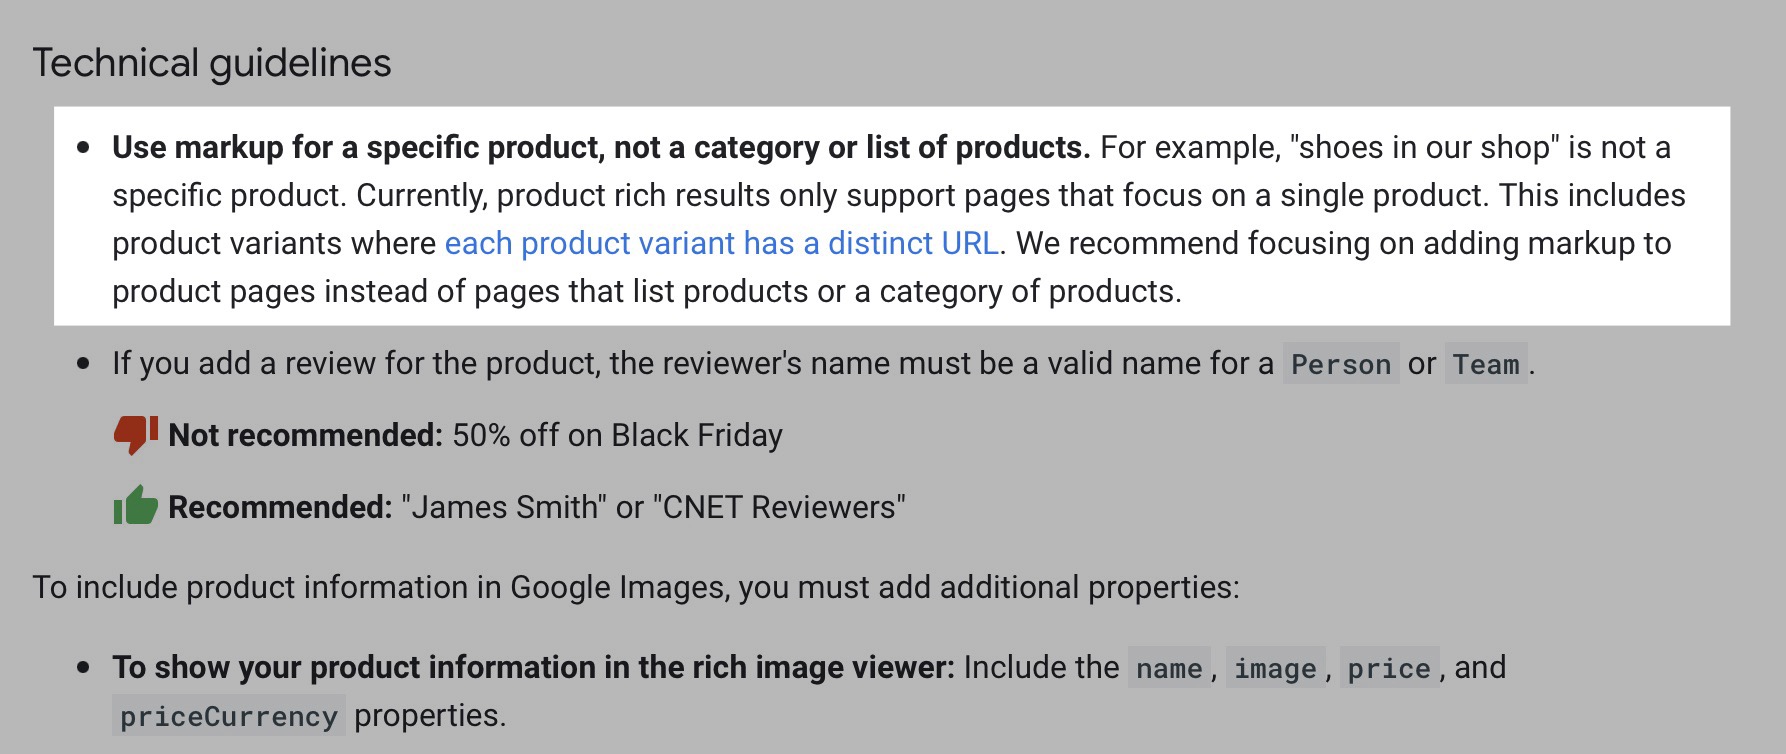 Google advises to use markup for specific products rather than categories or lists